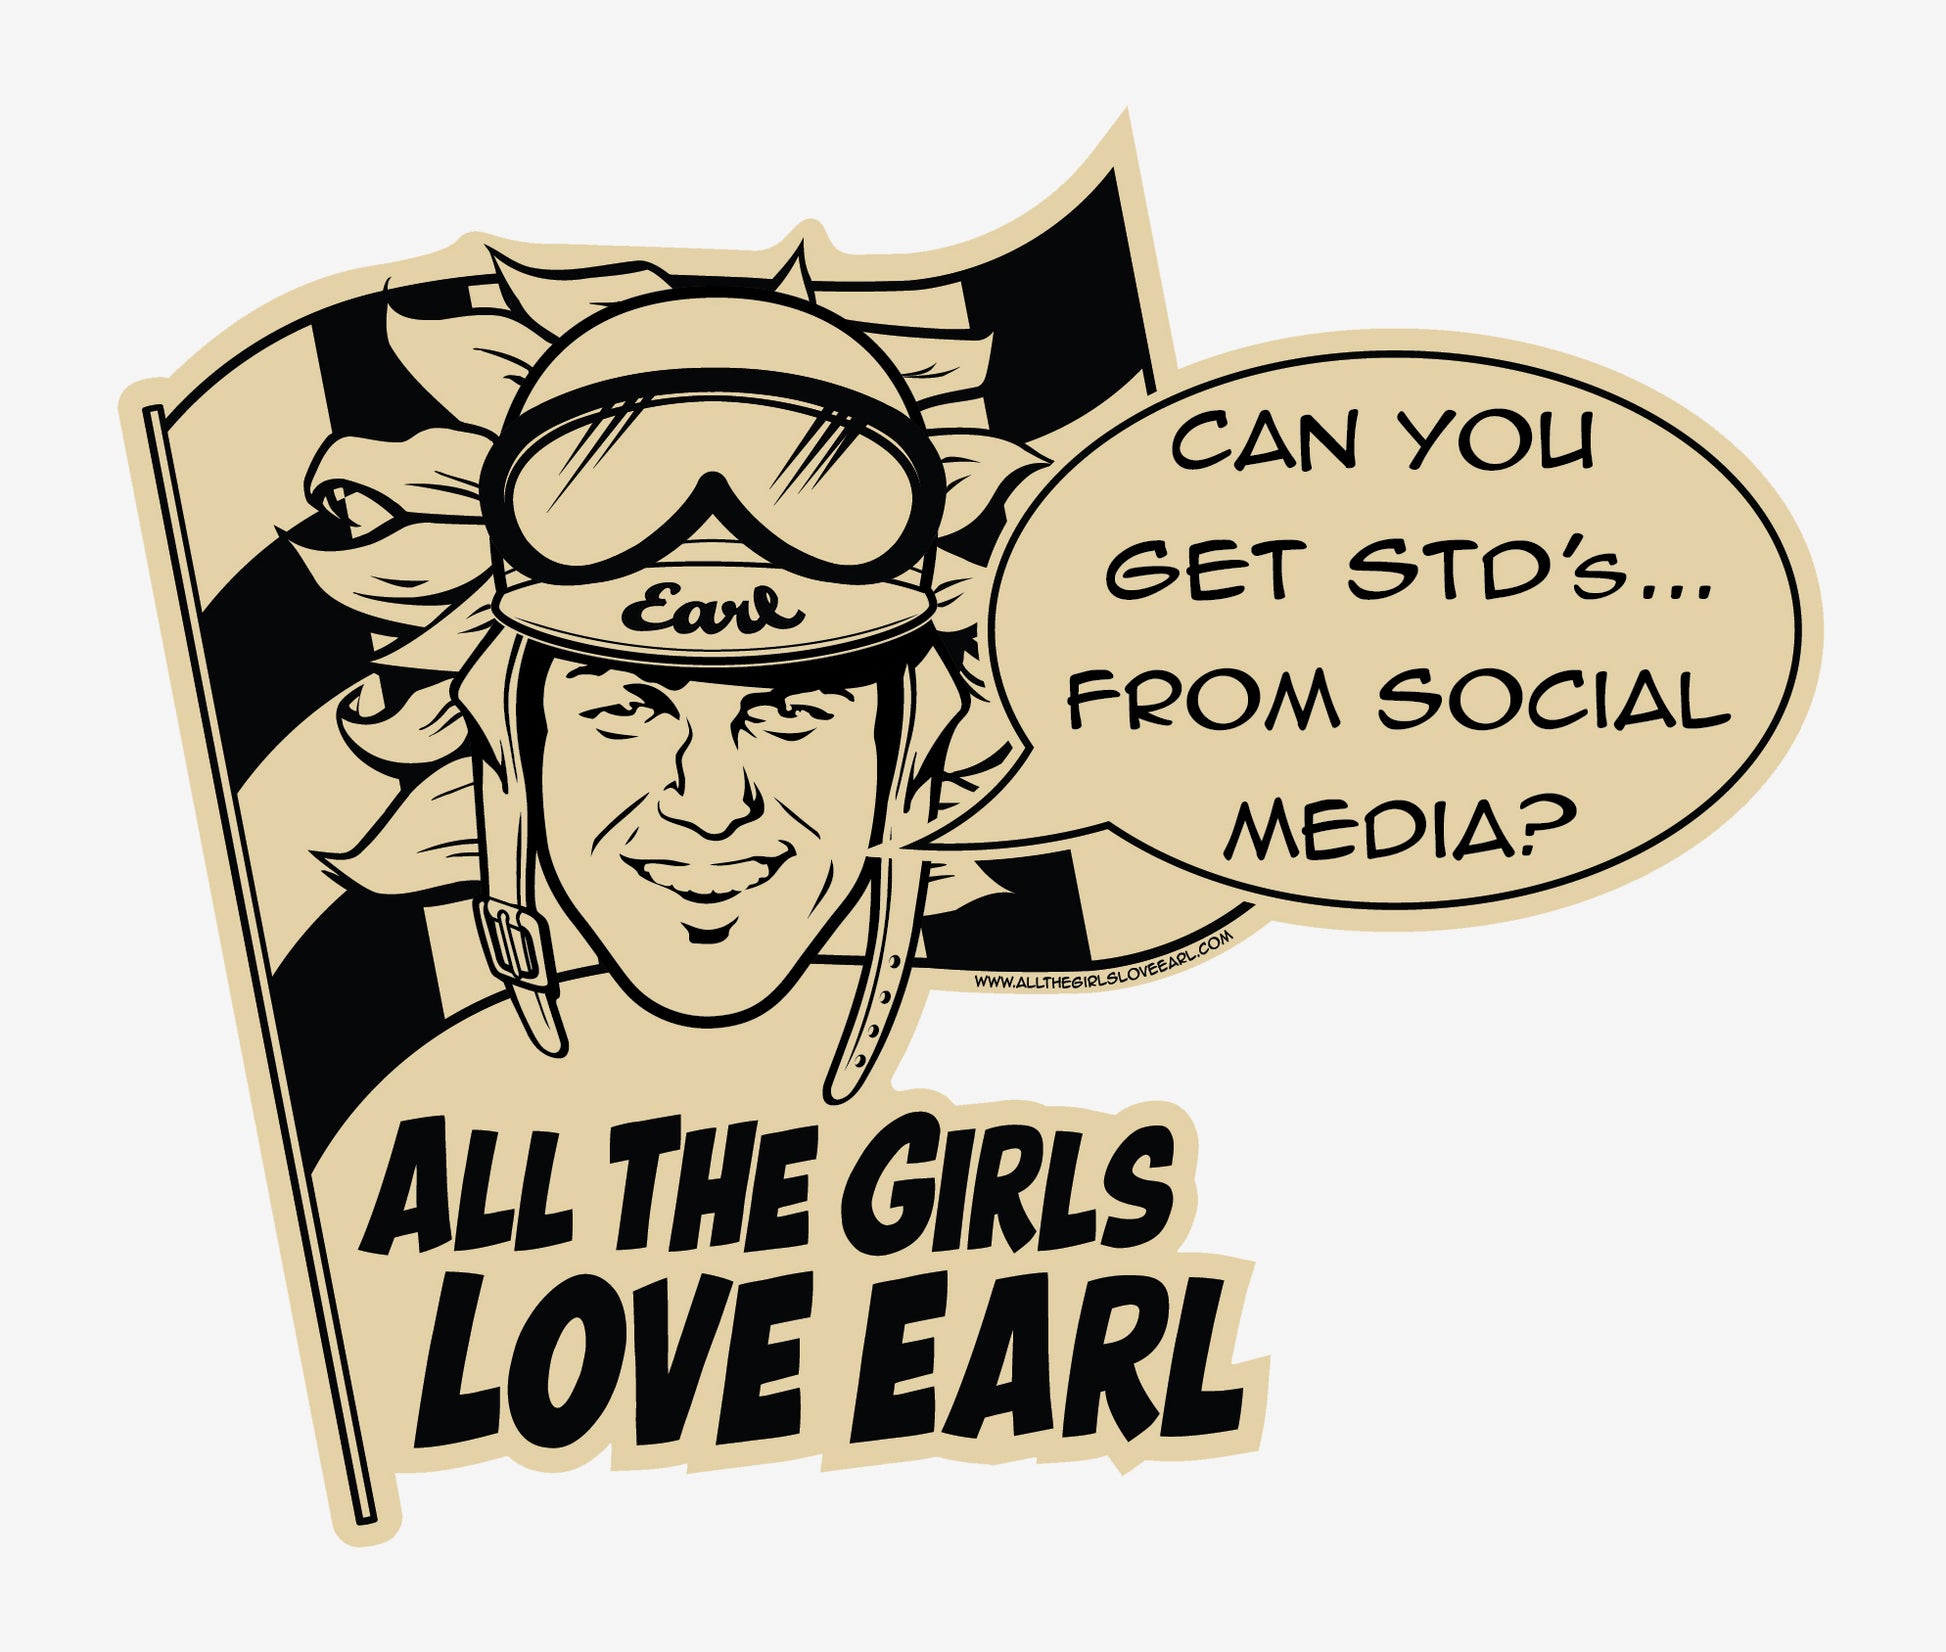 Earl Says Sticker: "Can you get STD's... from social media?"